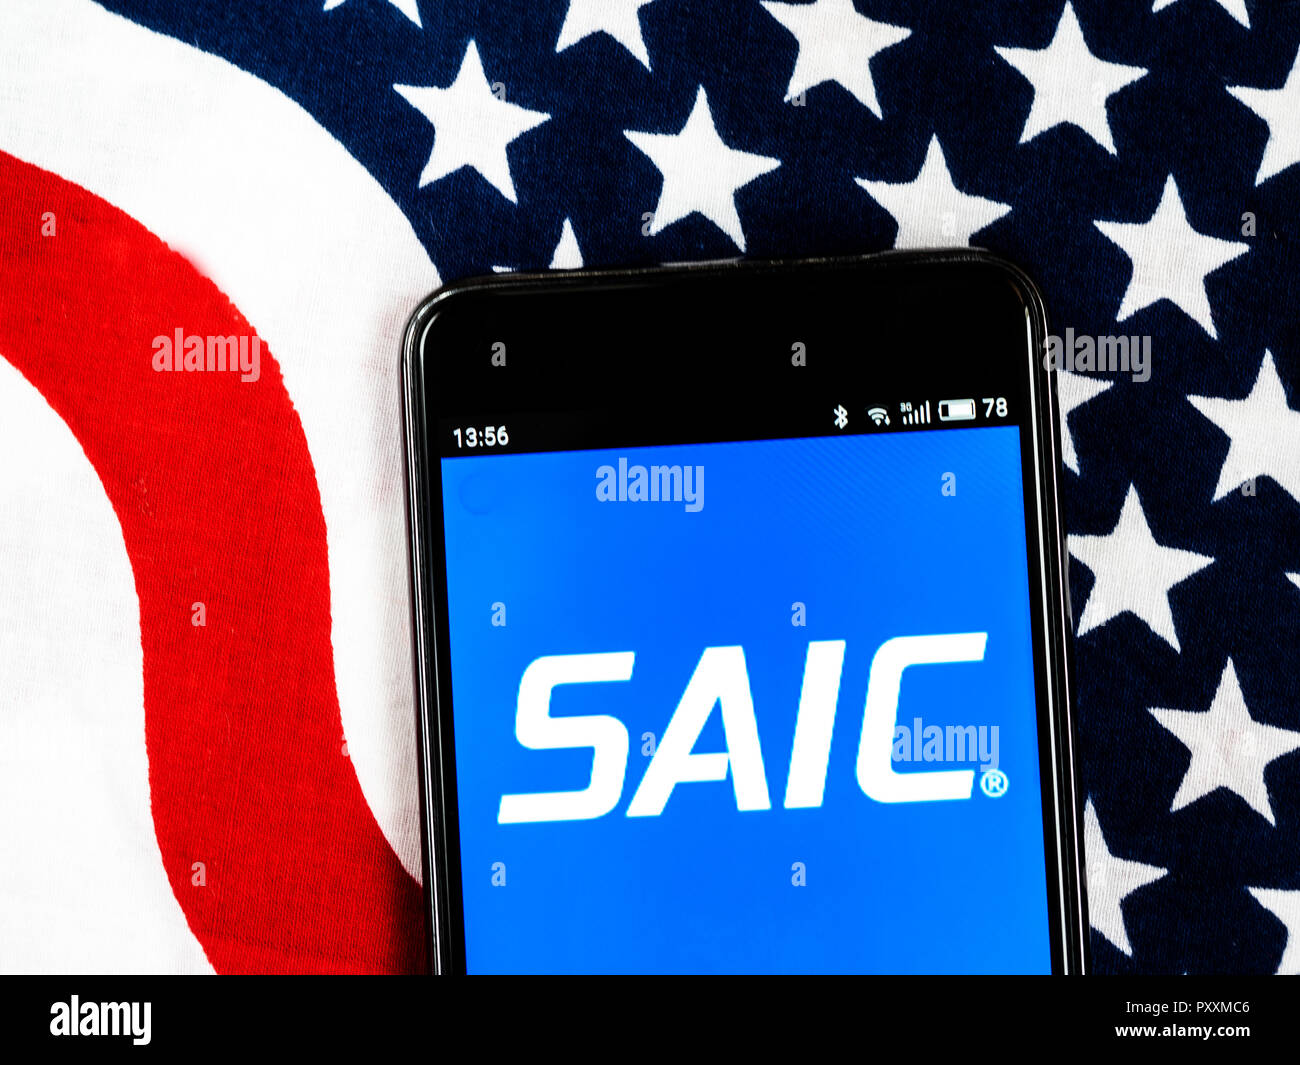 Science Applications International Corporation (SAIC)  logo seen displayed on smart phone.. Science Applications International Corporation provides government services and information technology support. Stock Photo